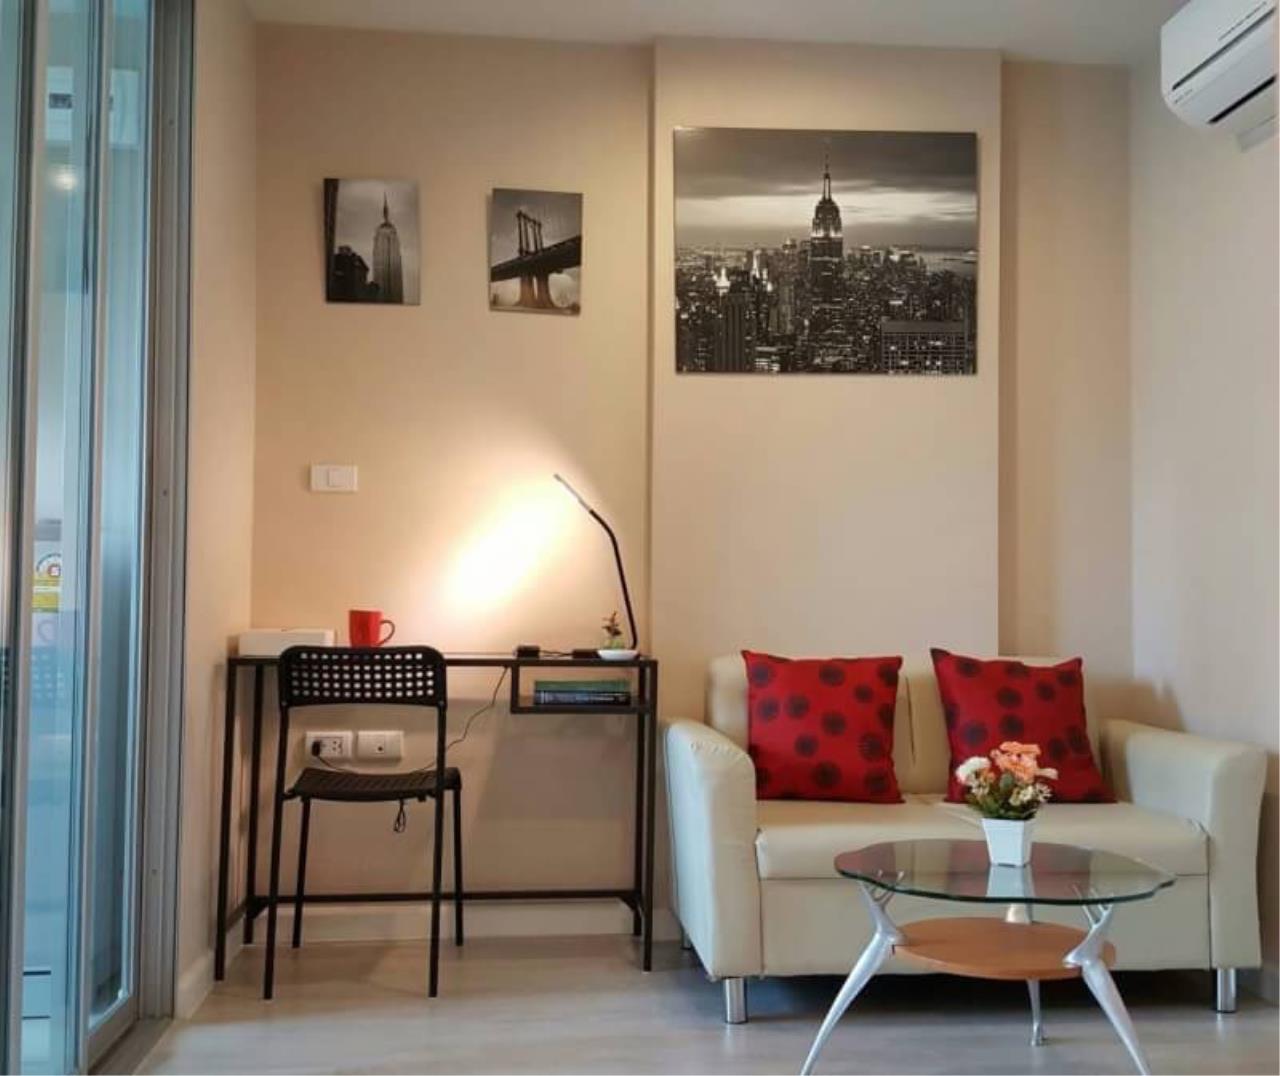 RE/MAX All Star Realty Agency's Metro Luxe Rama4 for rent 11,000 baht only. 28sqm 9